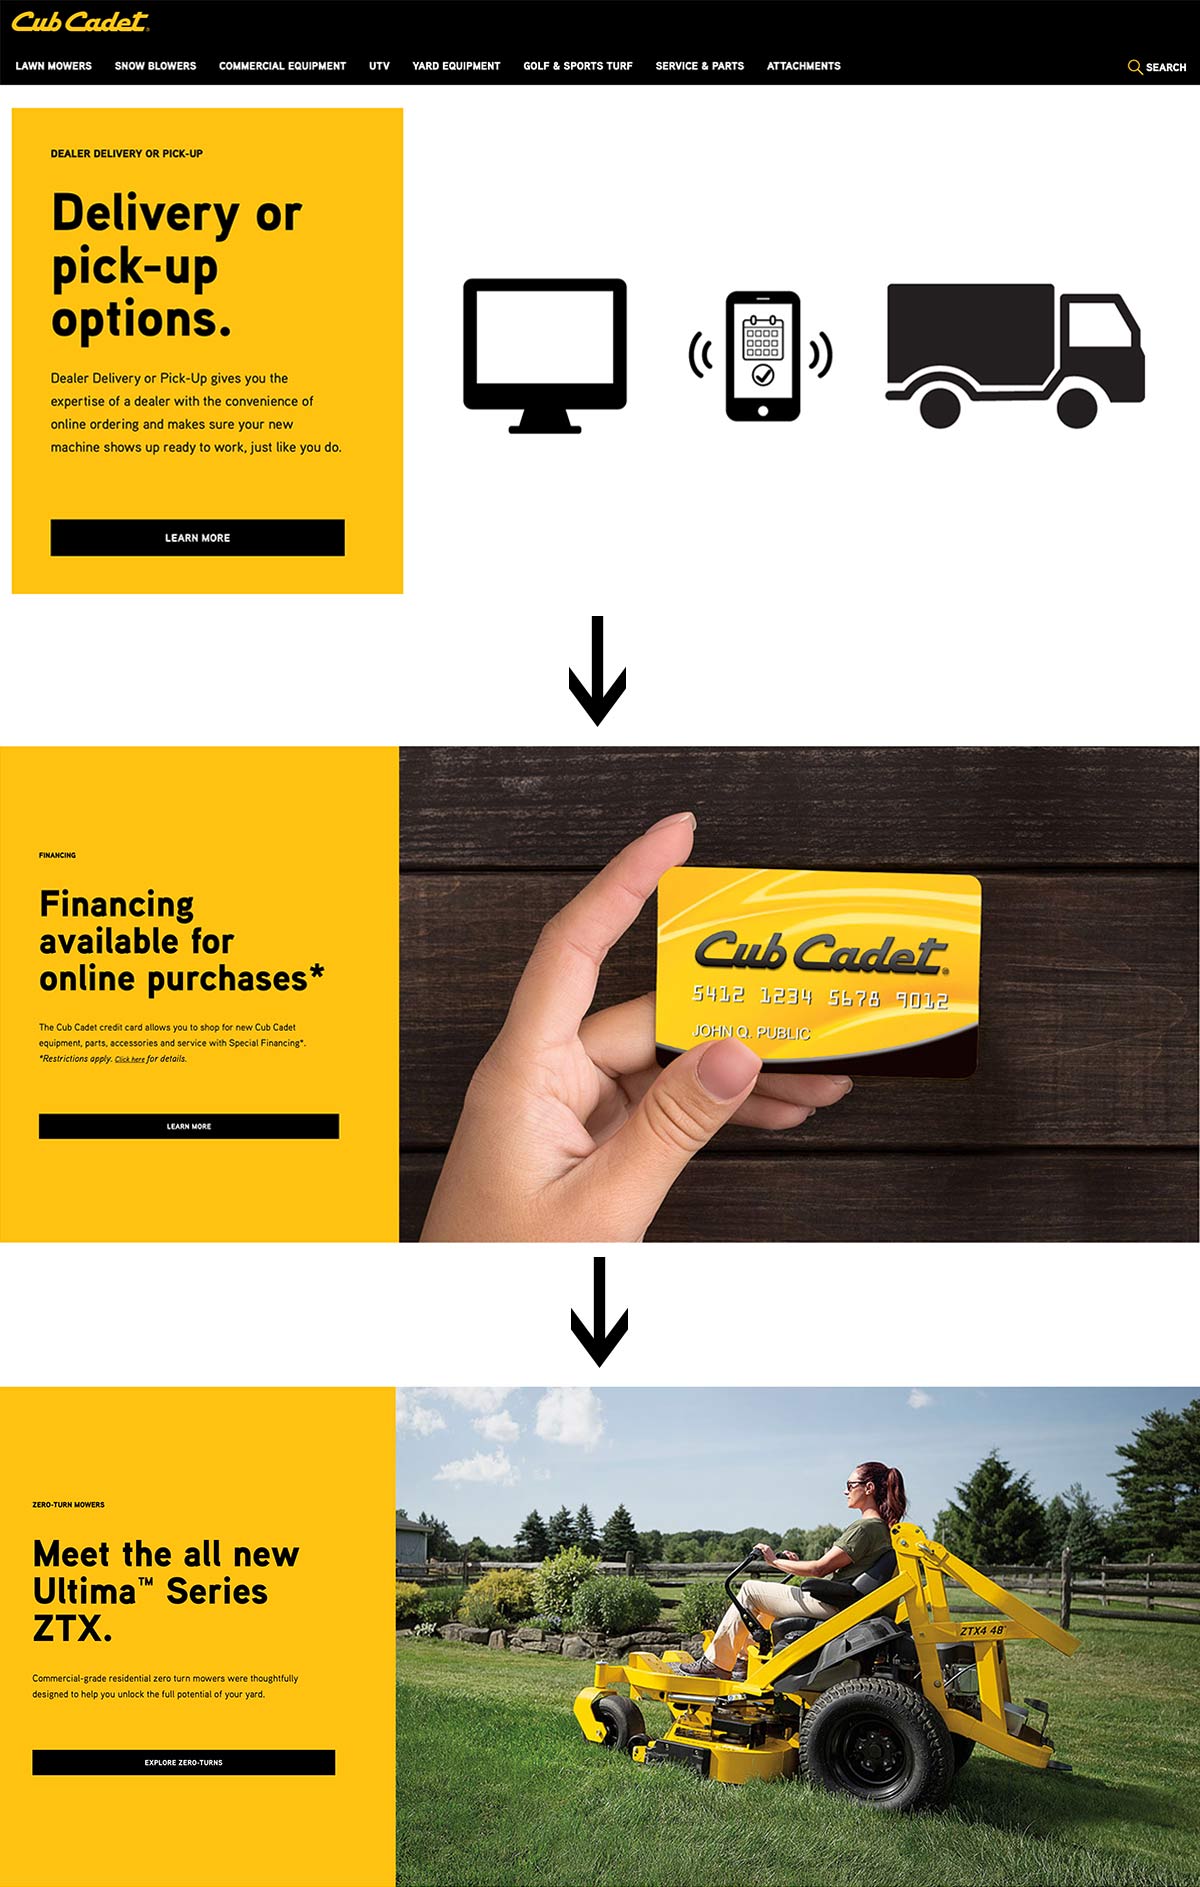 Cub Cadet breakout of slides for delivery and financing